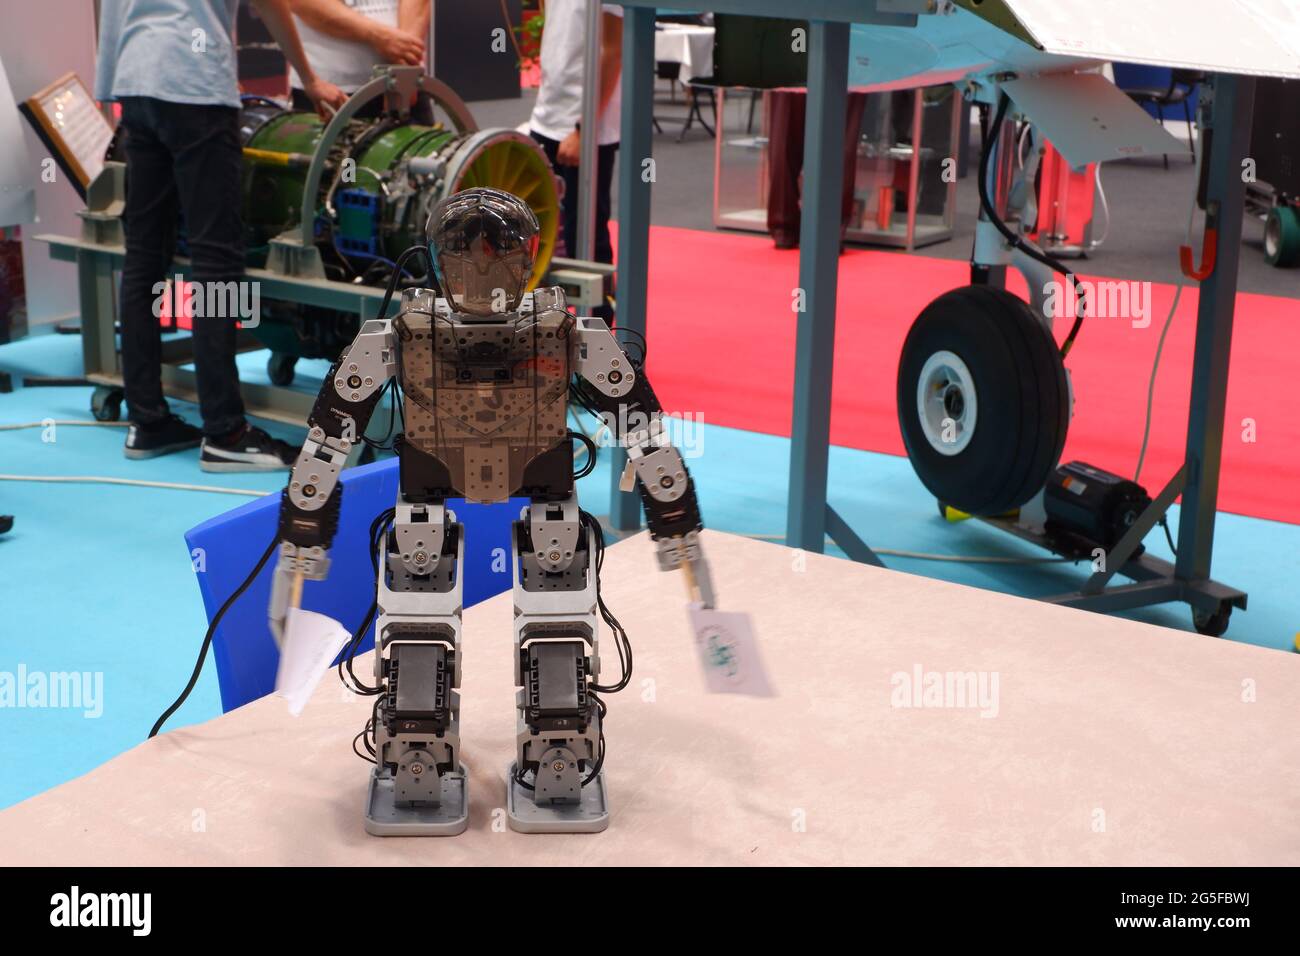 Small human-shaped robot holding banners at exhibition of an industrial fair Stock Photo